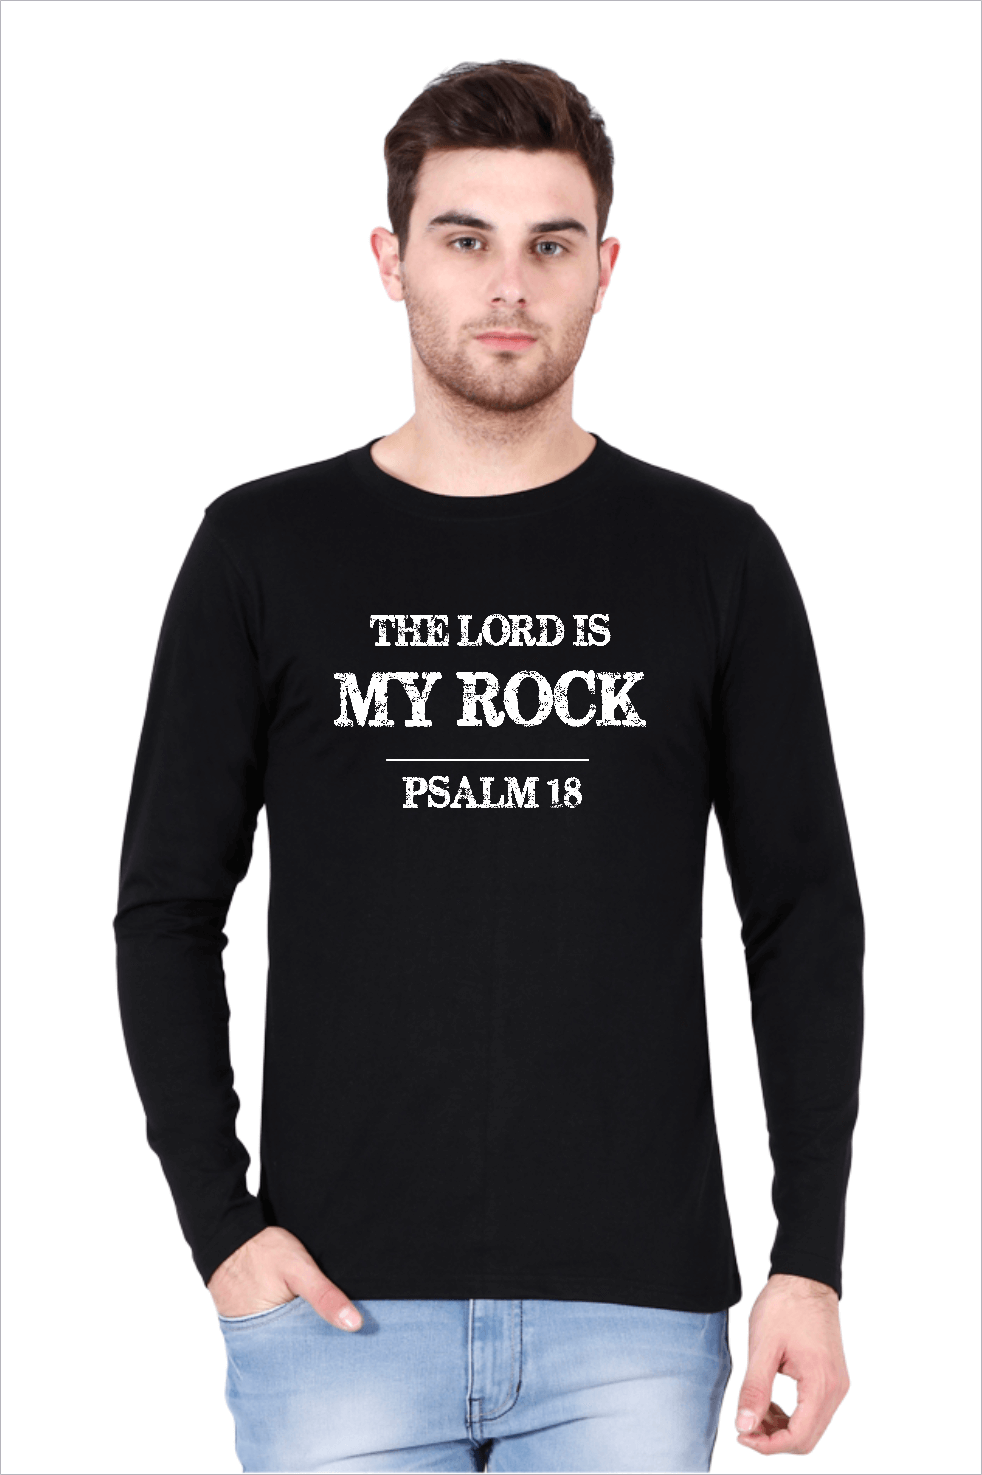 Living Words Men Round Neck T Shirt S / Black The Lord is my Rock - Psalm 18